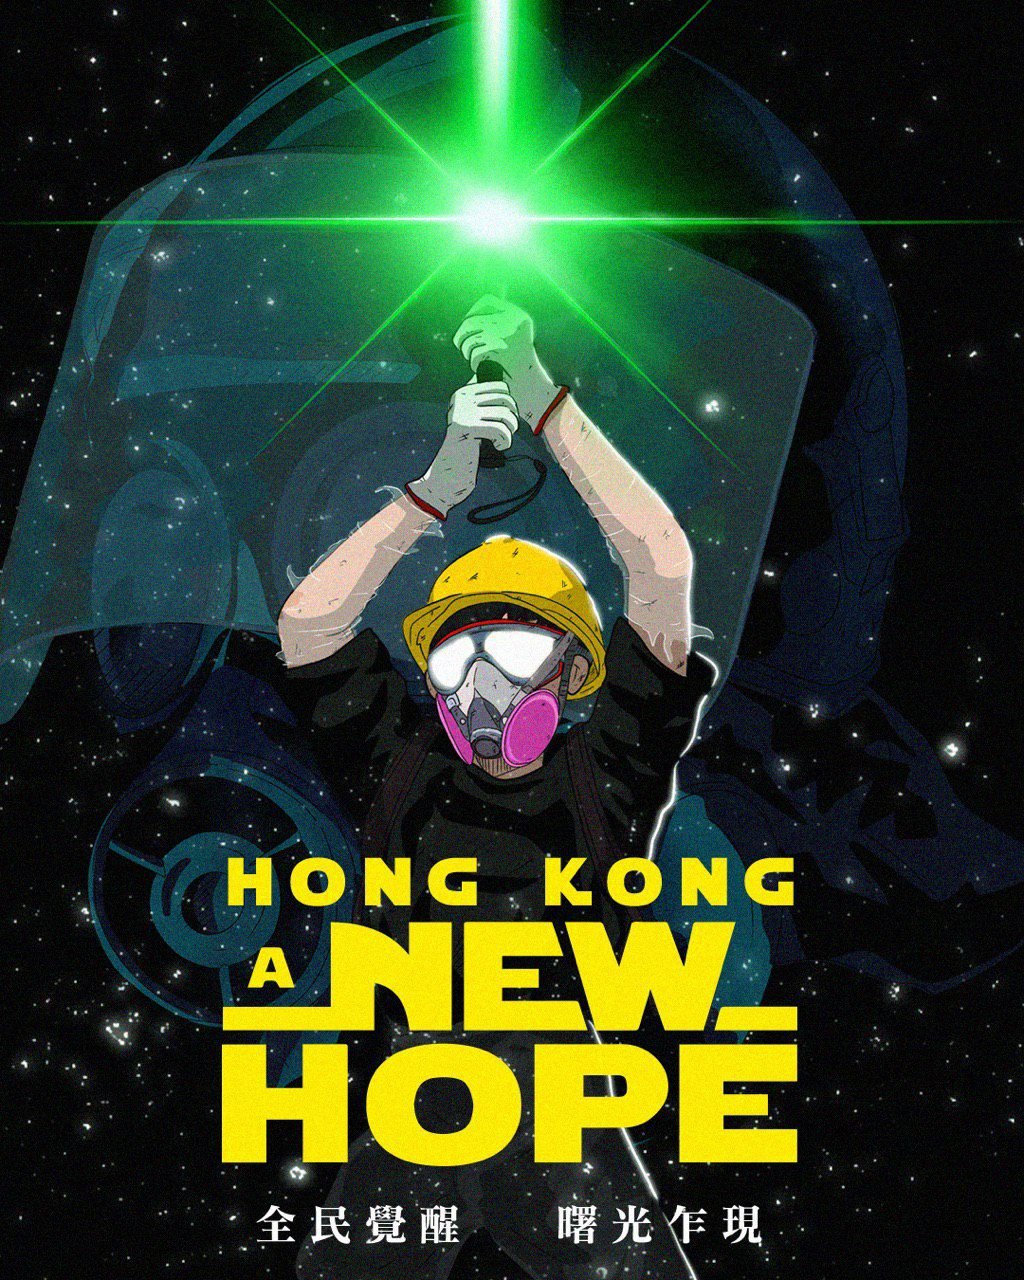 An adapted Star Wars movie poster, with Vader in the back replaced with a gas-masked riot cop. Luke in the foreground has been replaced by a protestor in a yellow hard hat, with a half face respirator, a black short-sleeved shirt, and work gloves, holding a green lightsaber aimed straight up. The caption reads: Hong Kong, A New Hope. Text at the bottom in Chinese reads: "All citizens awaken / At the first light of dawn." 